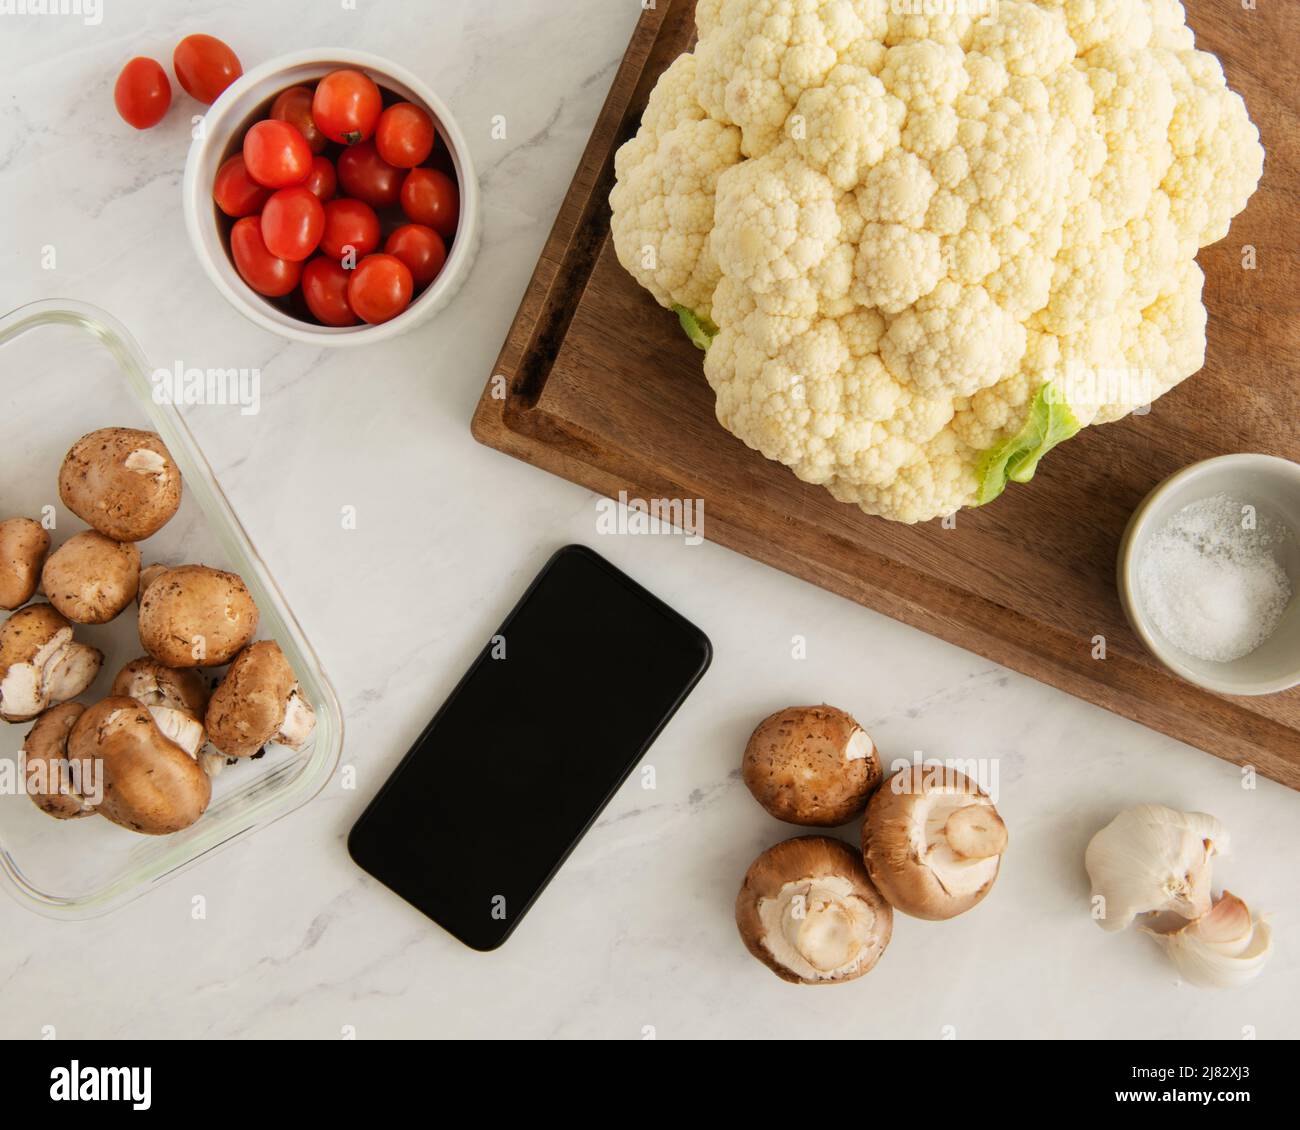 Cooking scene with Cauliflower, mushrooms, garlic, and tomatoes and smart phone for instructions Stock Photo